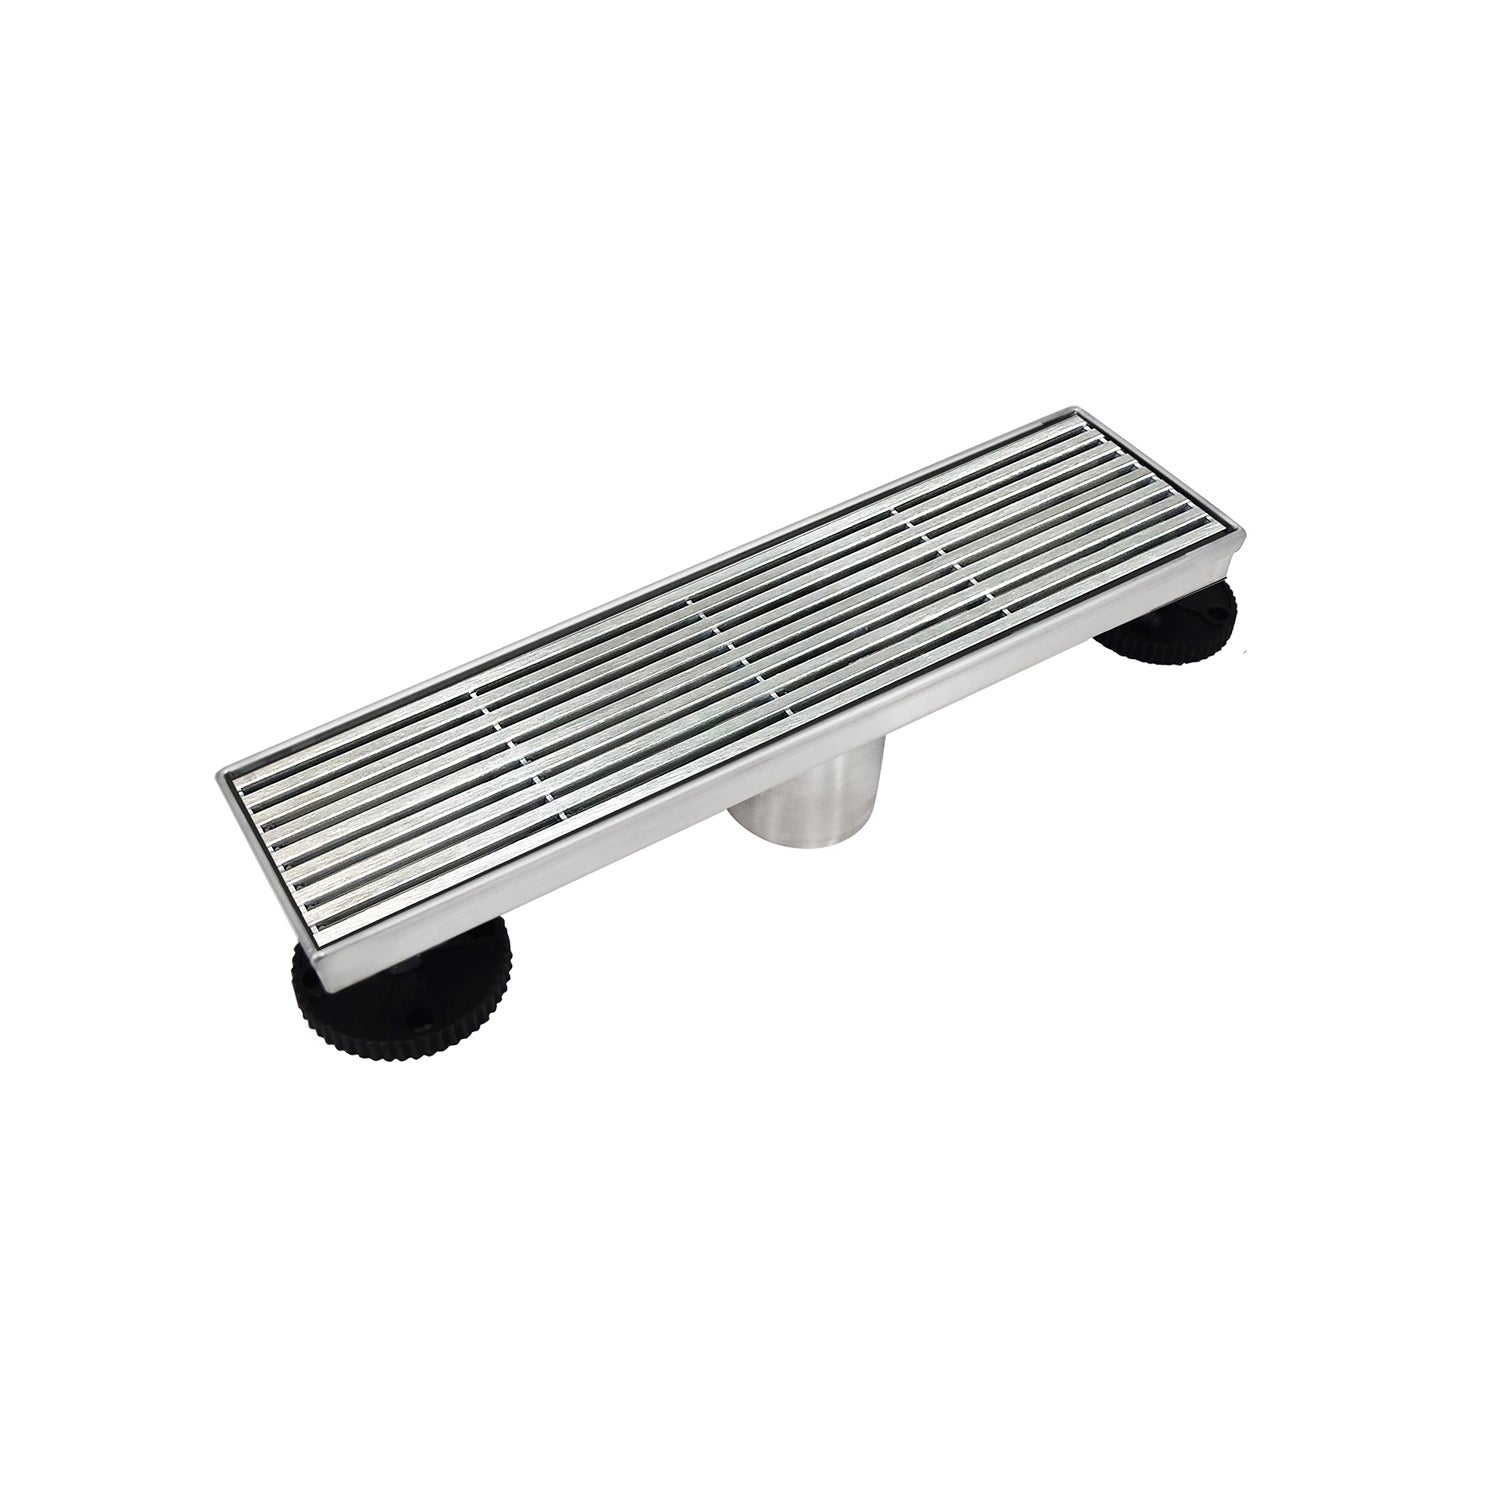 Dax Rectangle Shower Floor Drain 18 Gauge Brushed Stainless Steel Finish 12 X 3 3/8 Inches (DR12-H01)